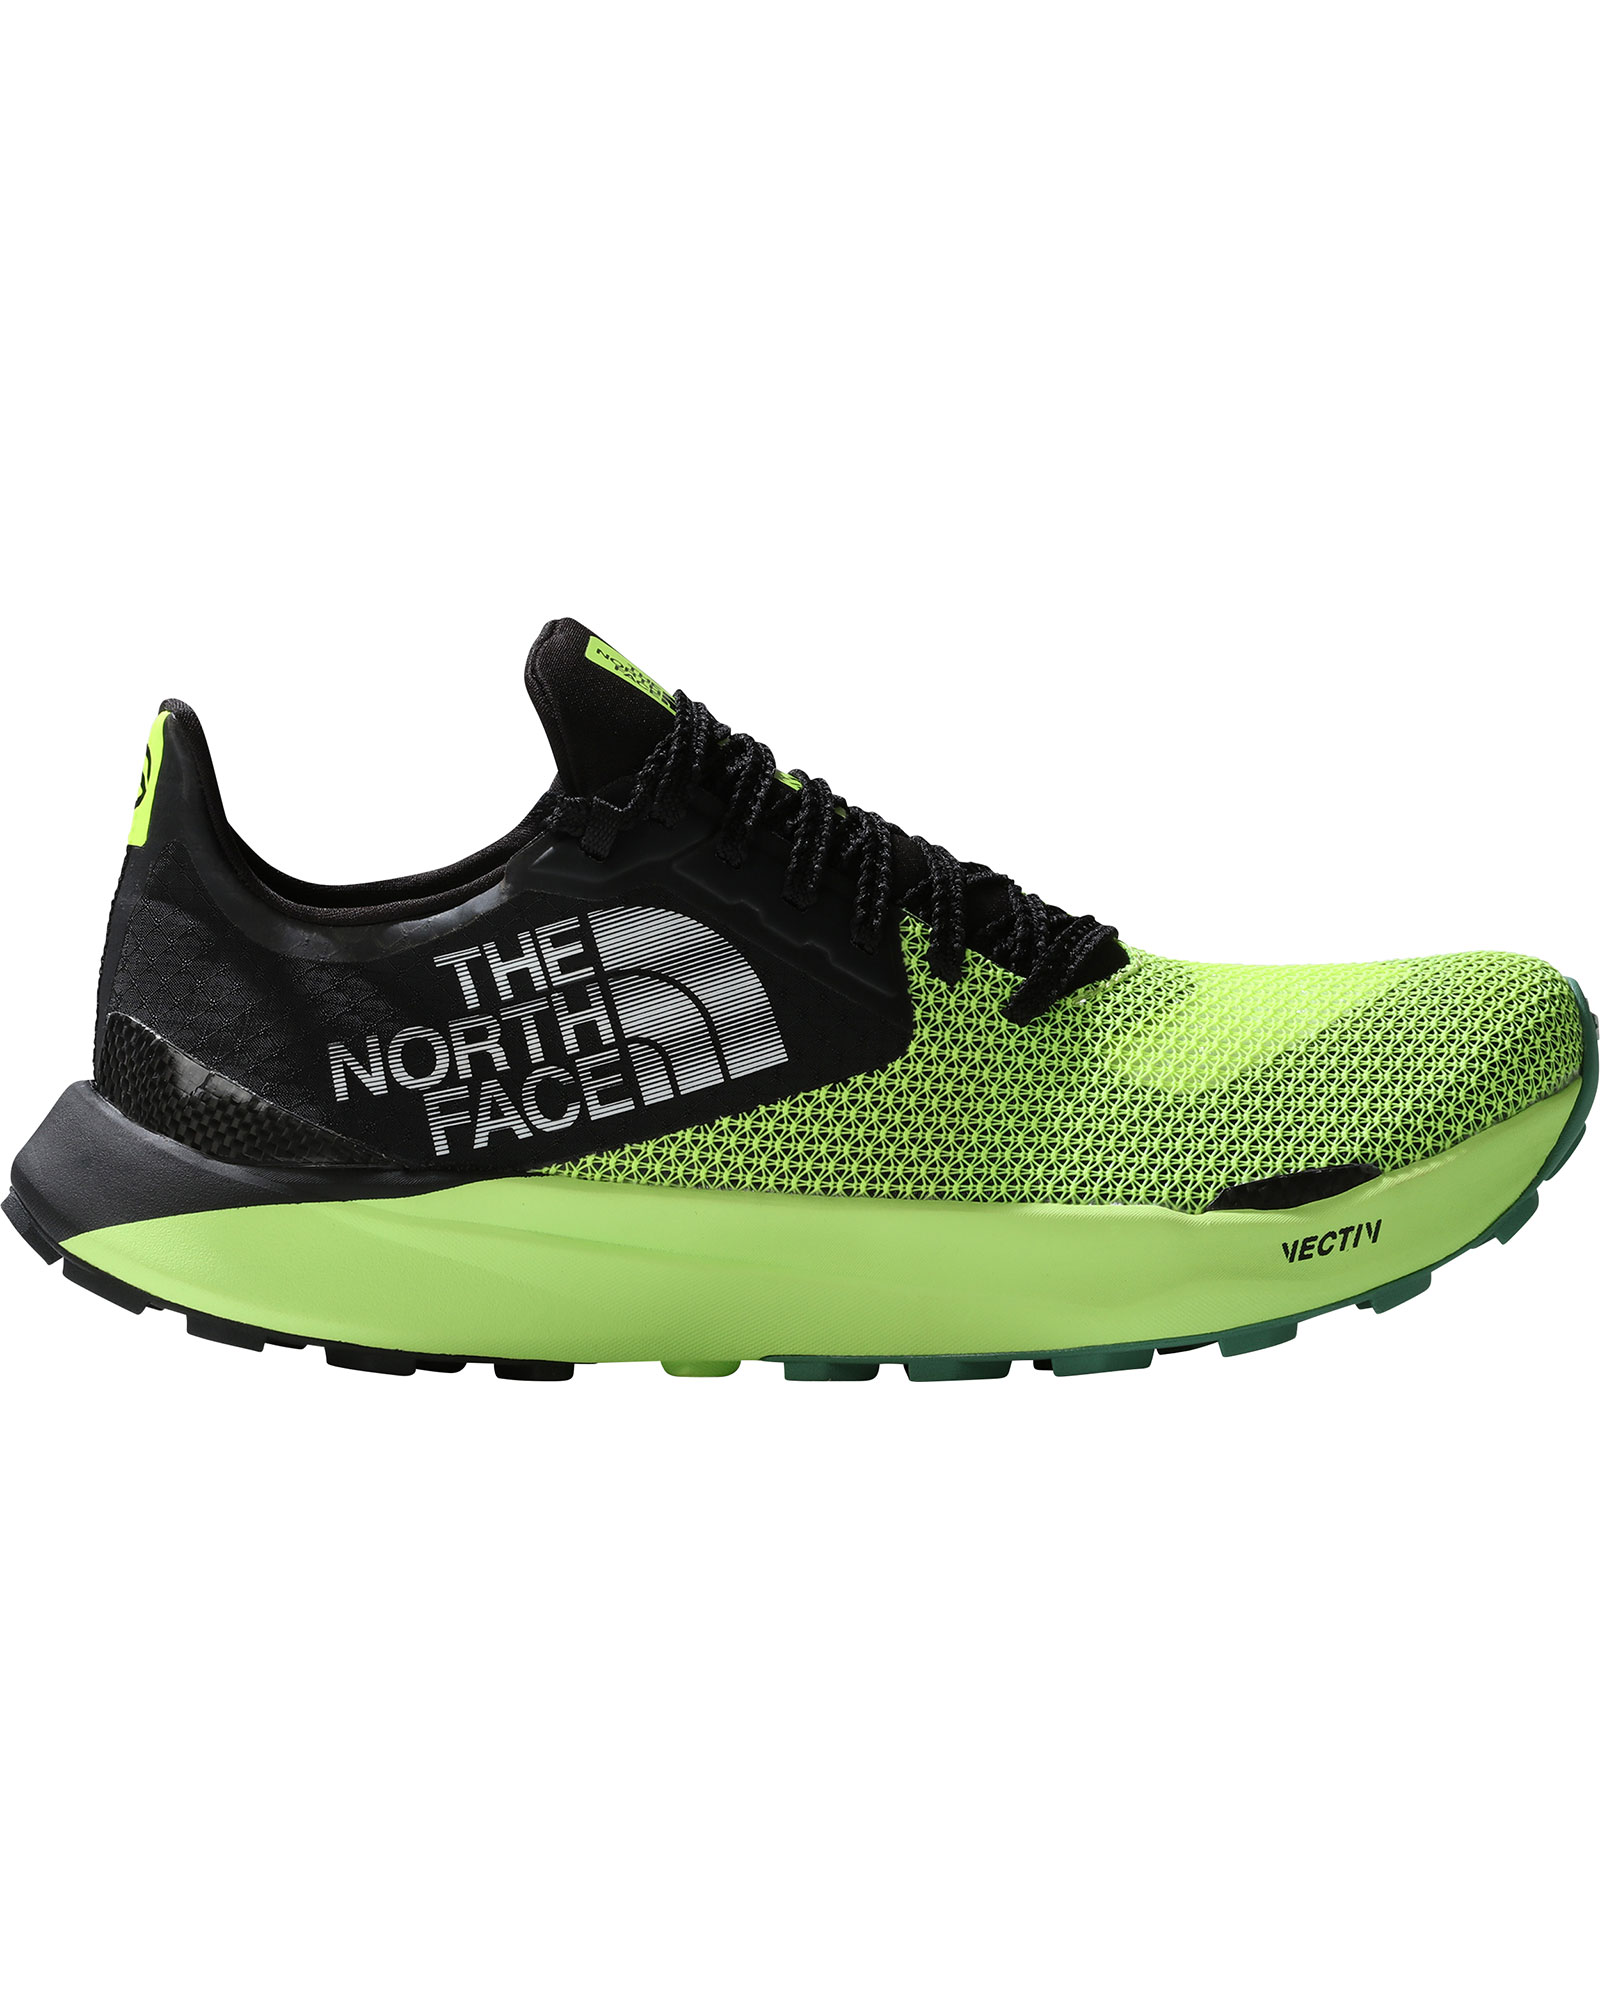 The North Face Summit Vectiv Sky Mens Trail Shoes